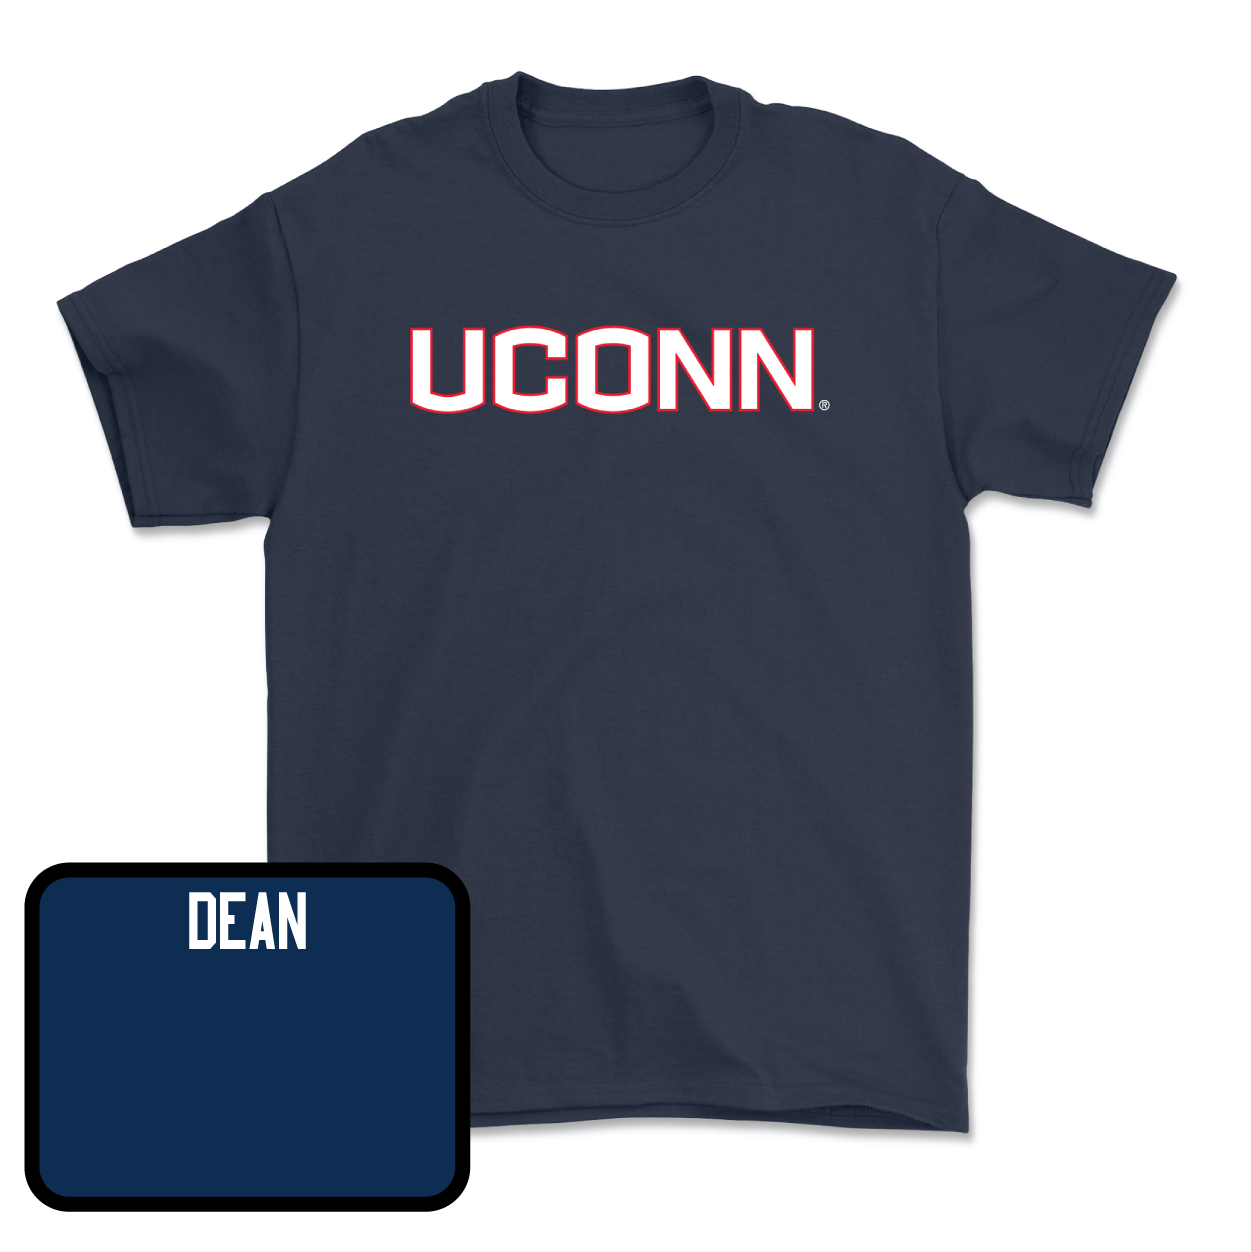 Navy Women's Rowing UConn Tee Youth Small / Erica Dean